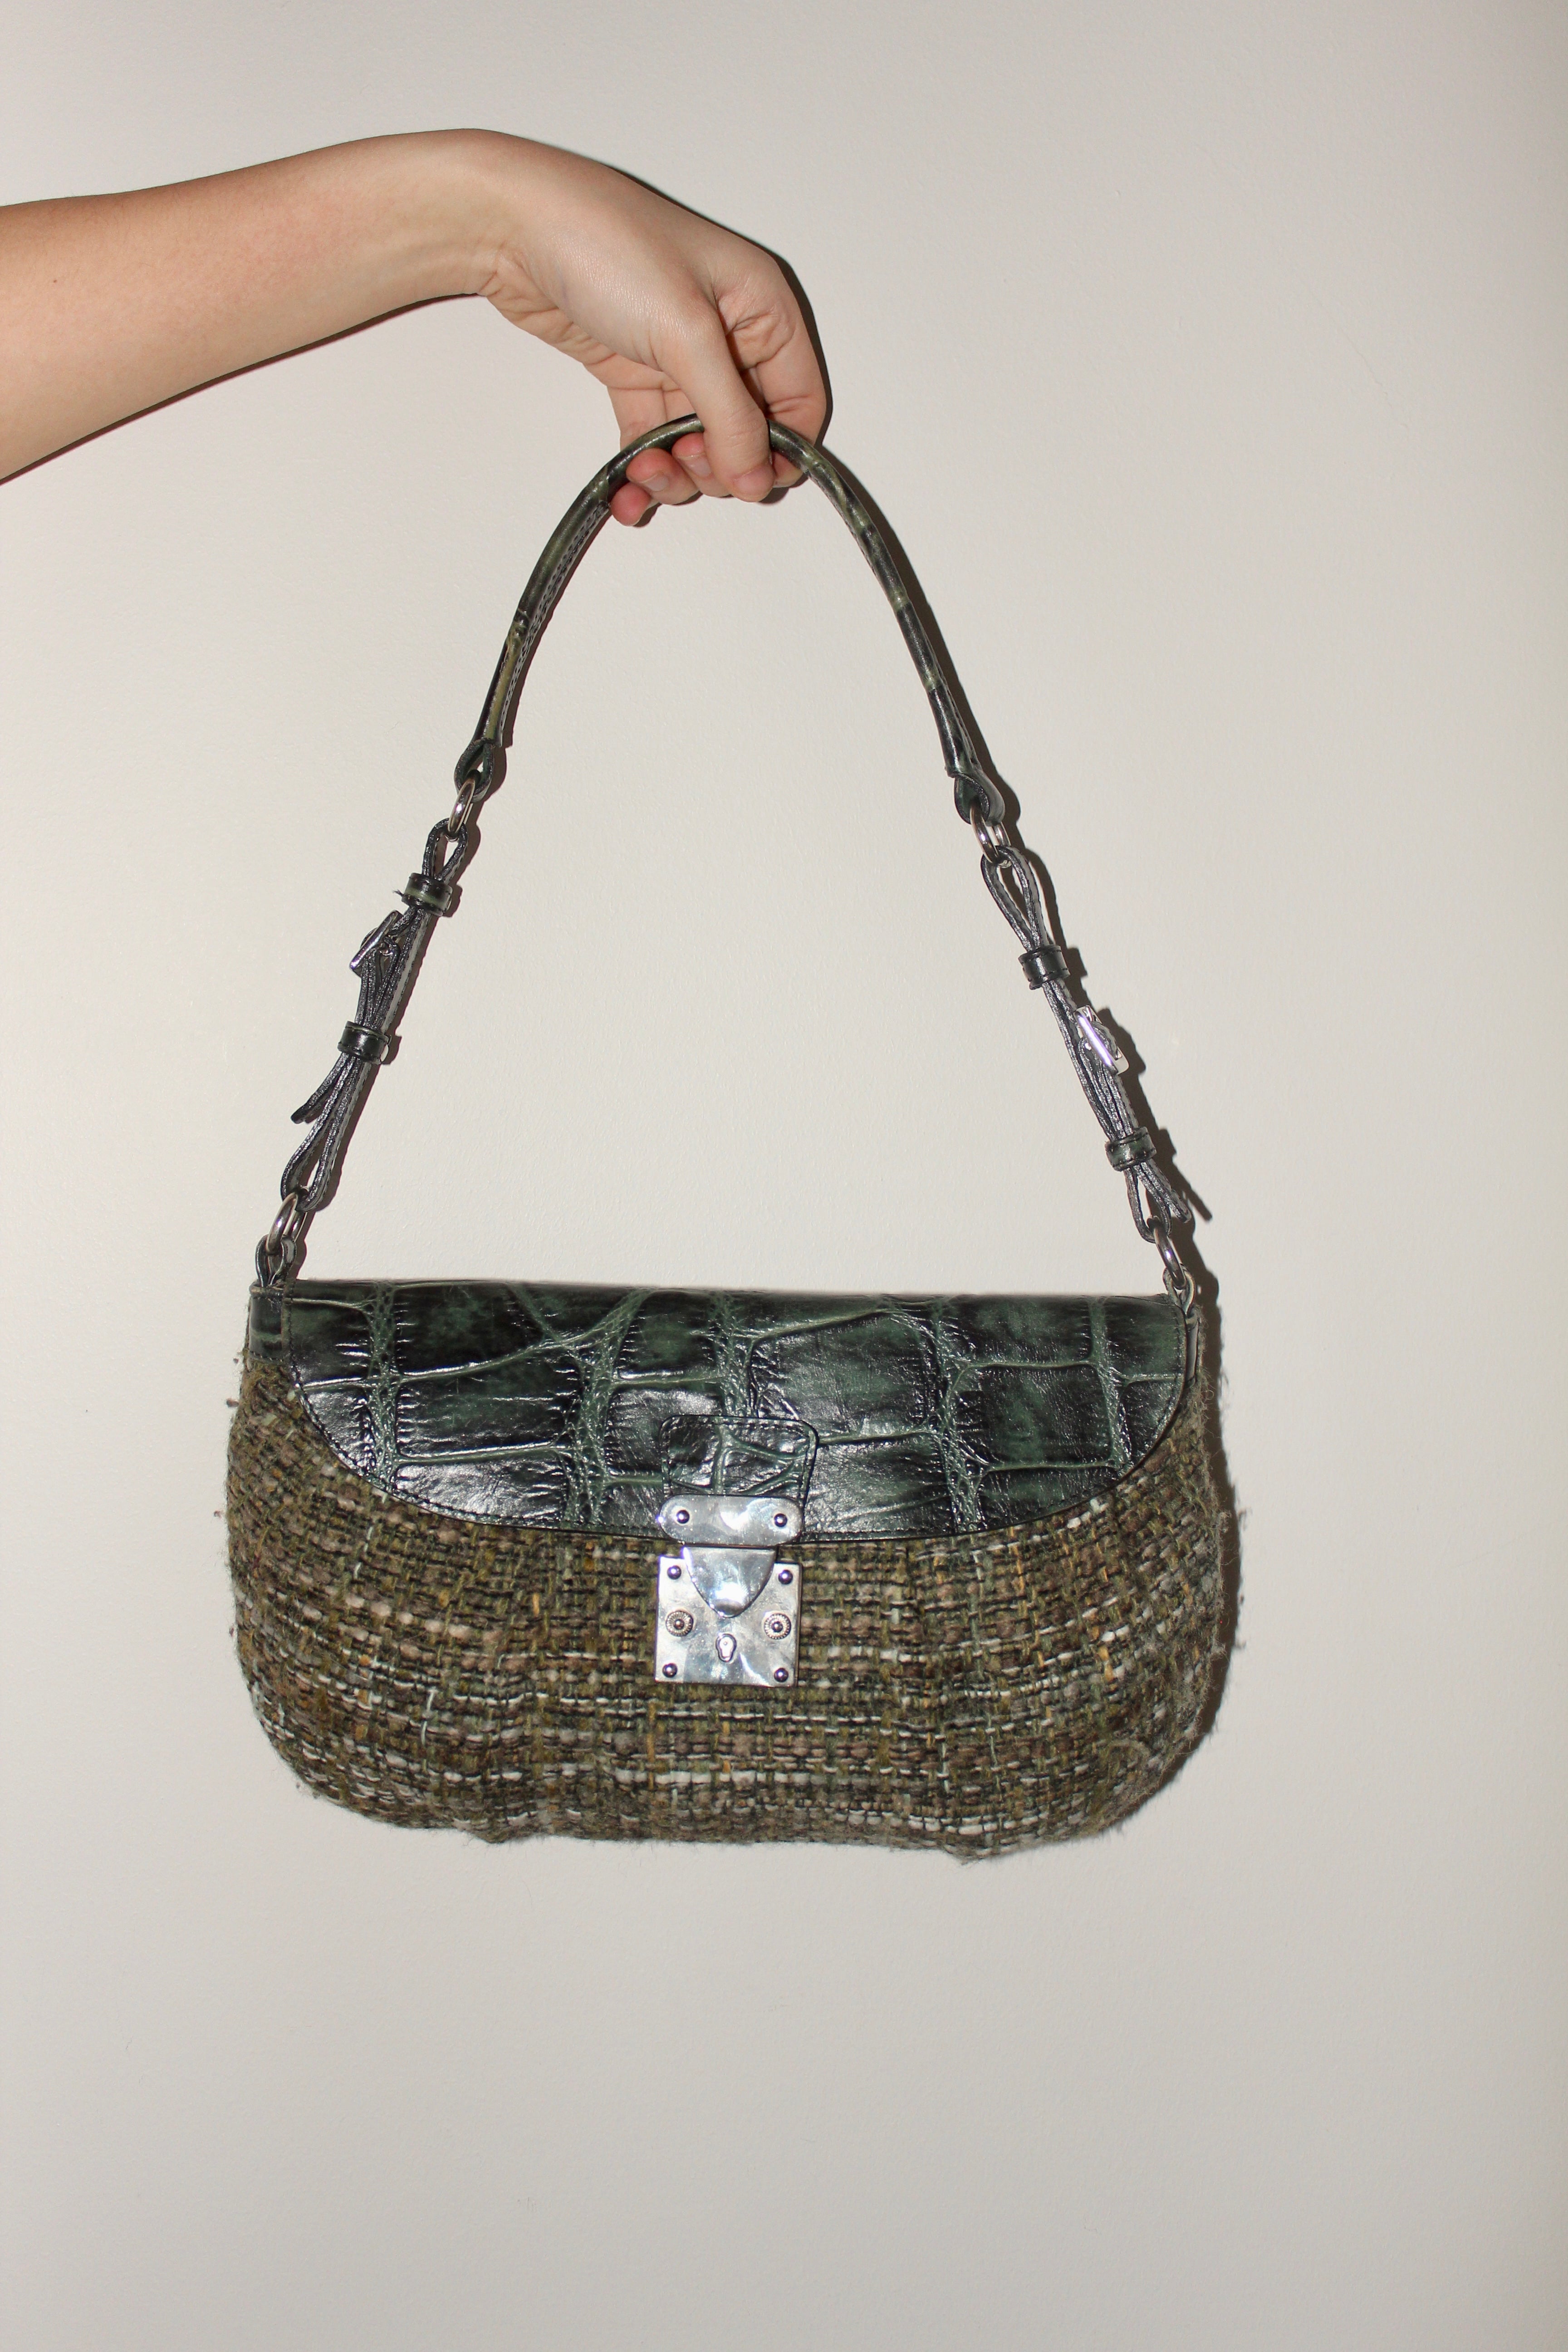 Vintage French Emerald Textured Purse